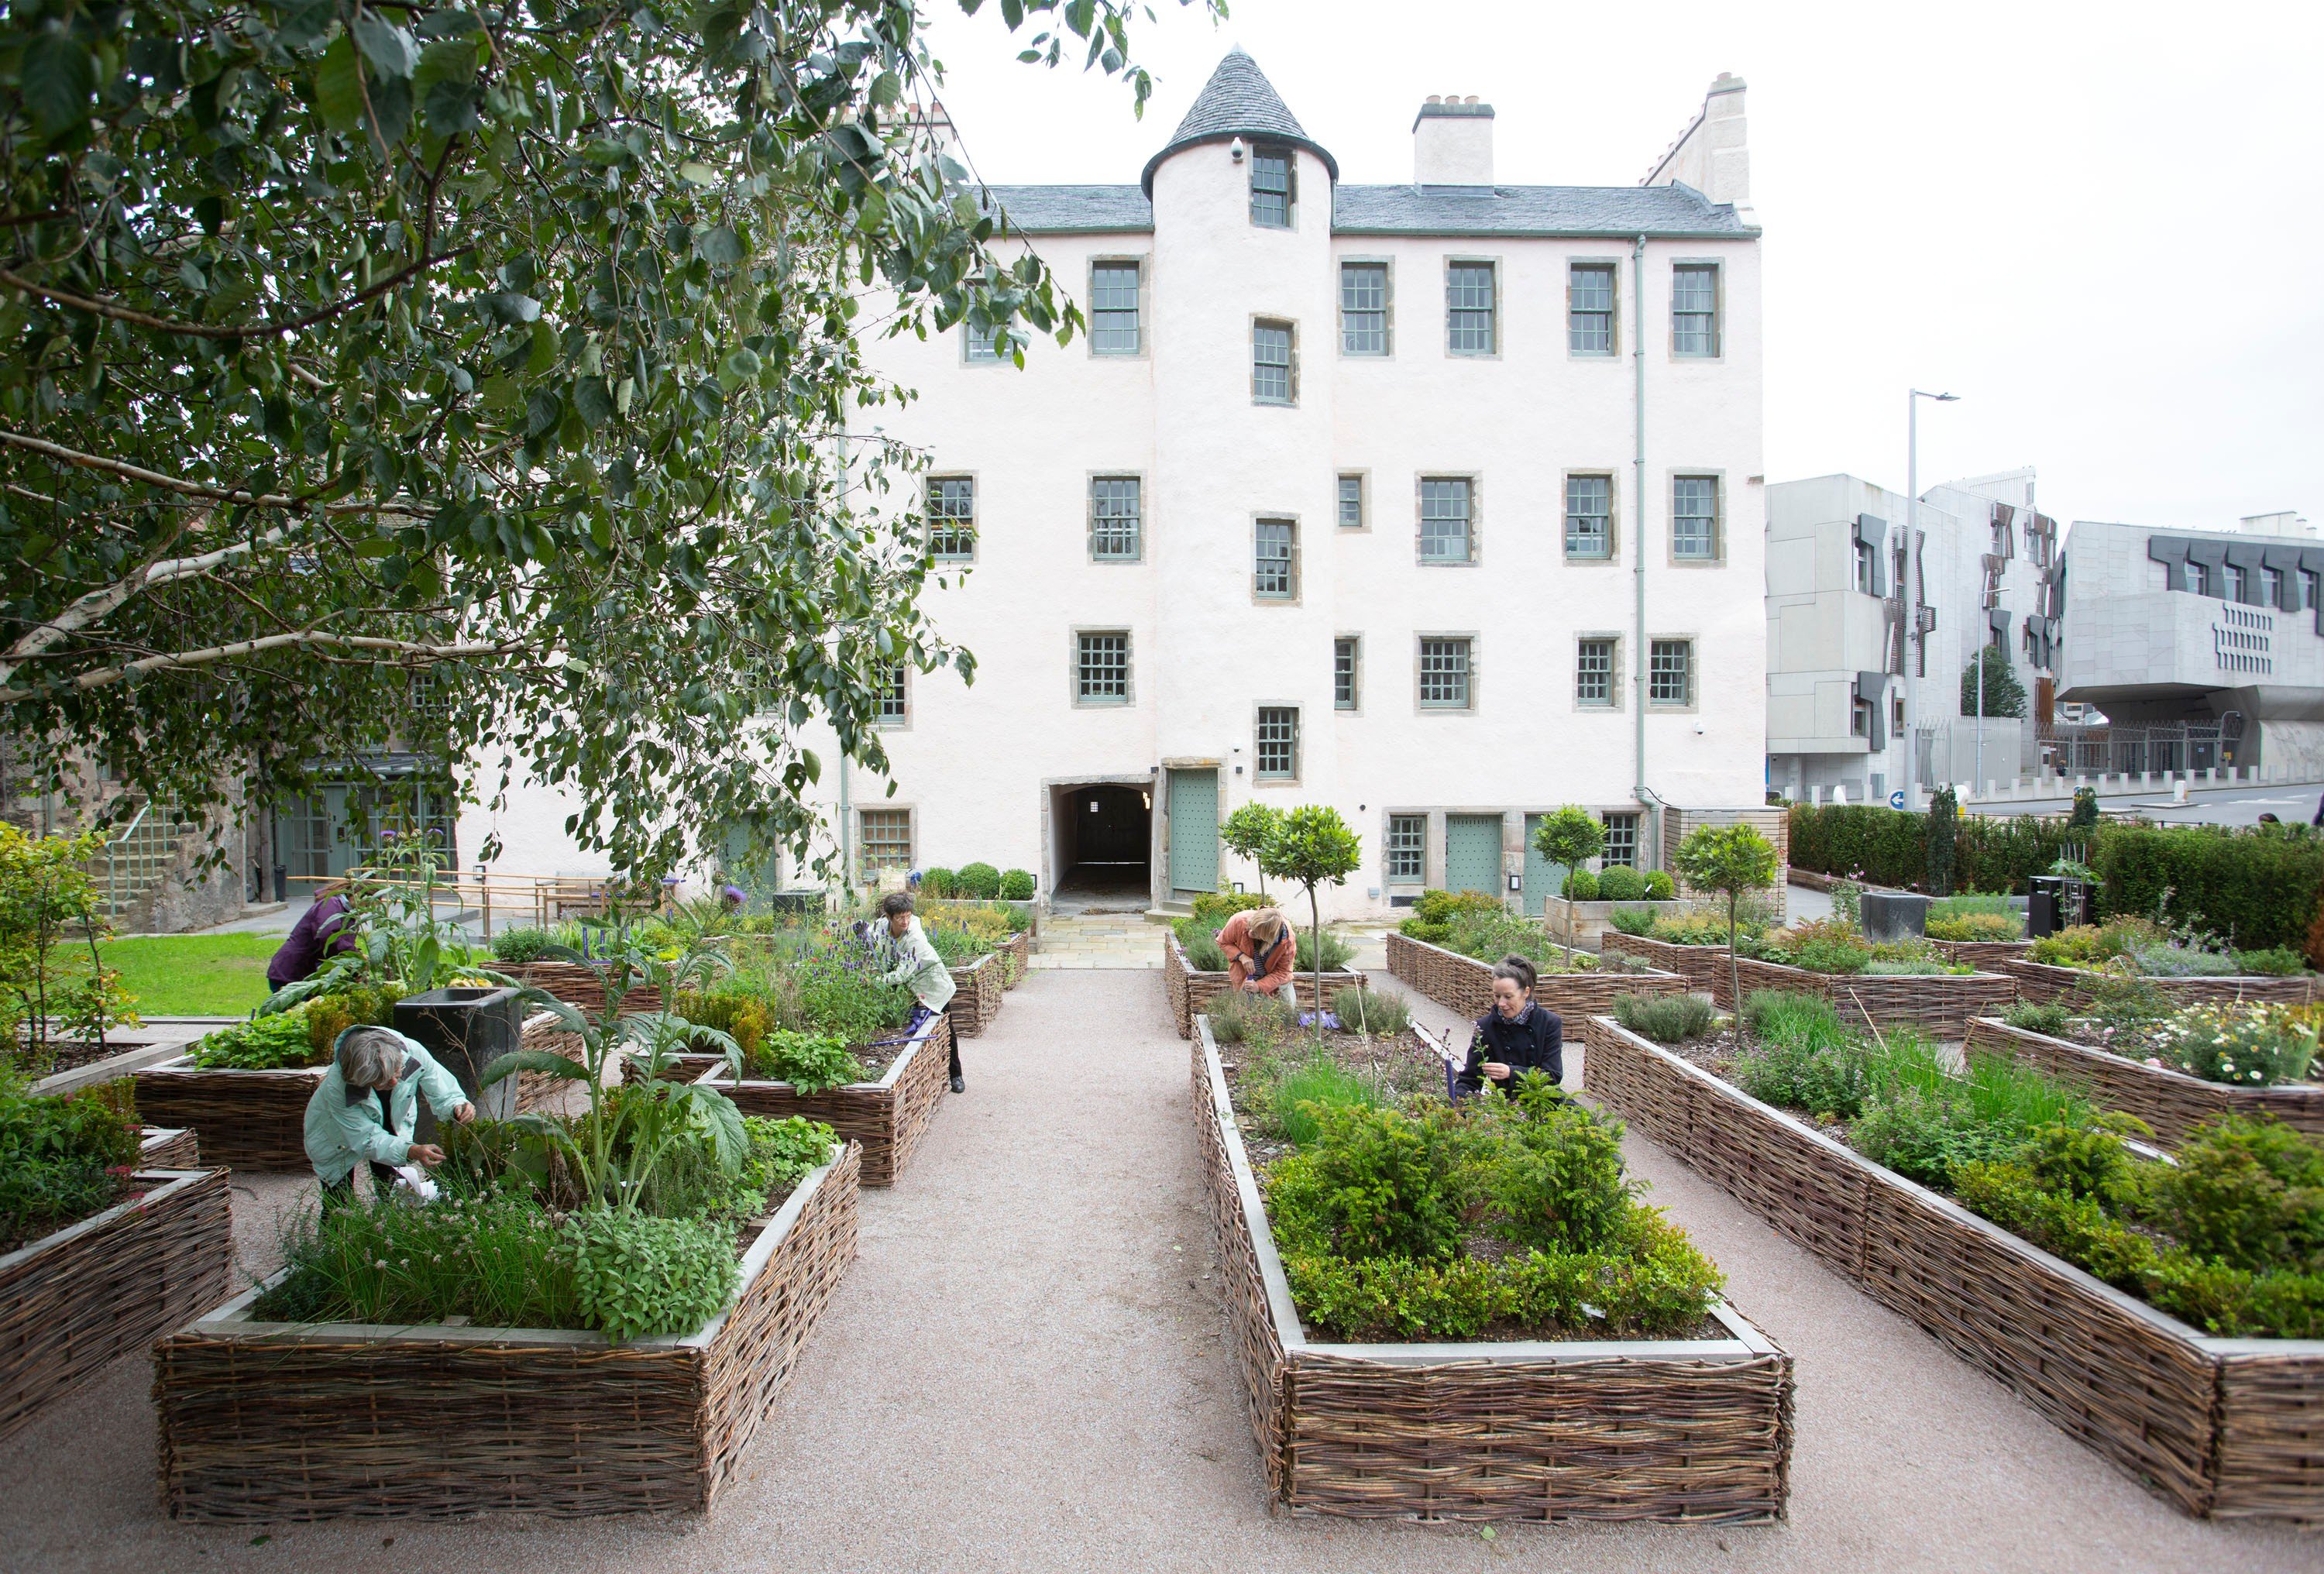 Physic Garden at the Palace of Holyroodhouse